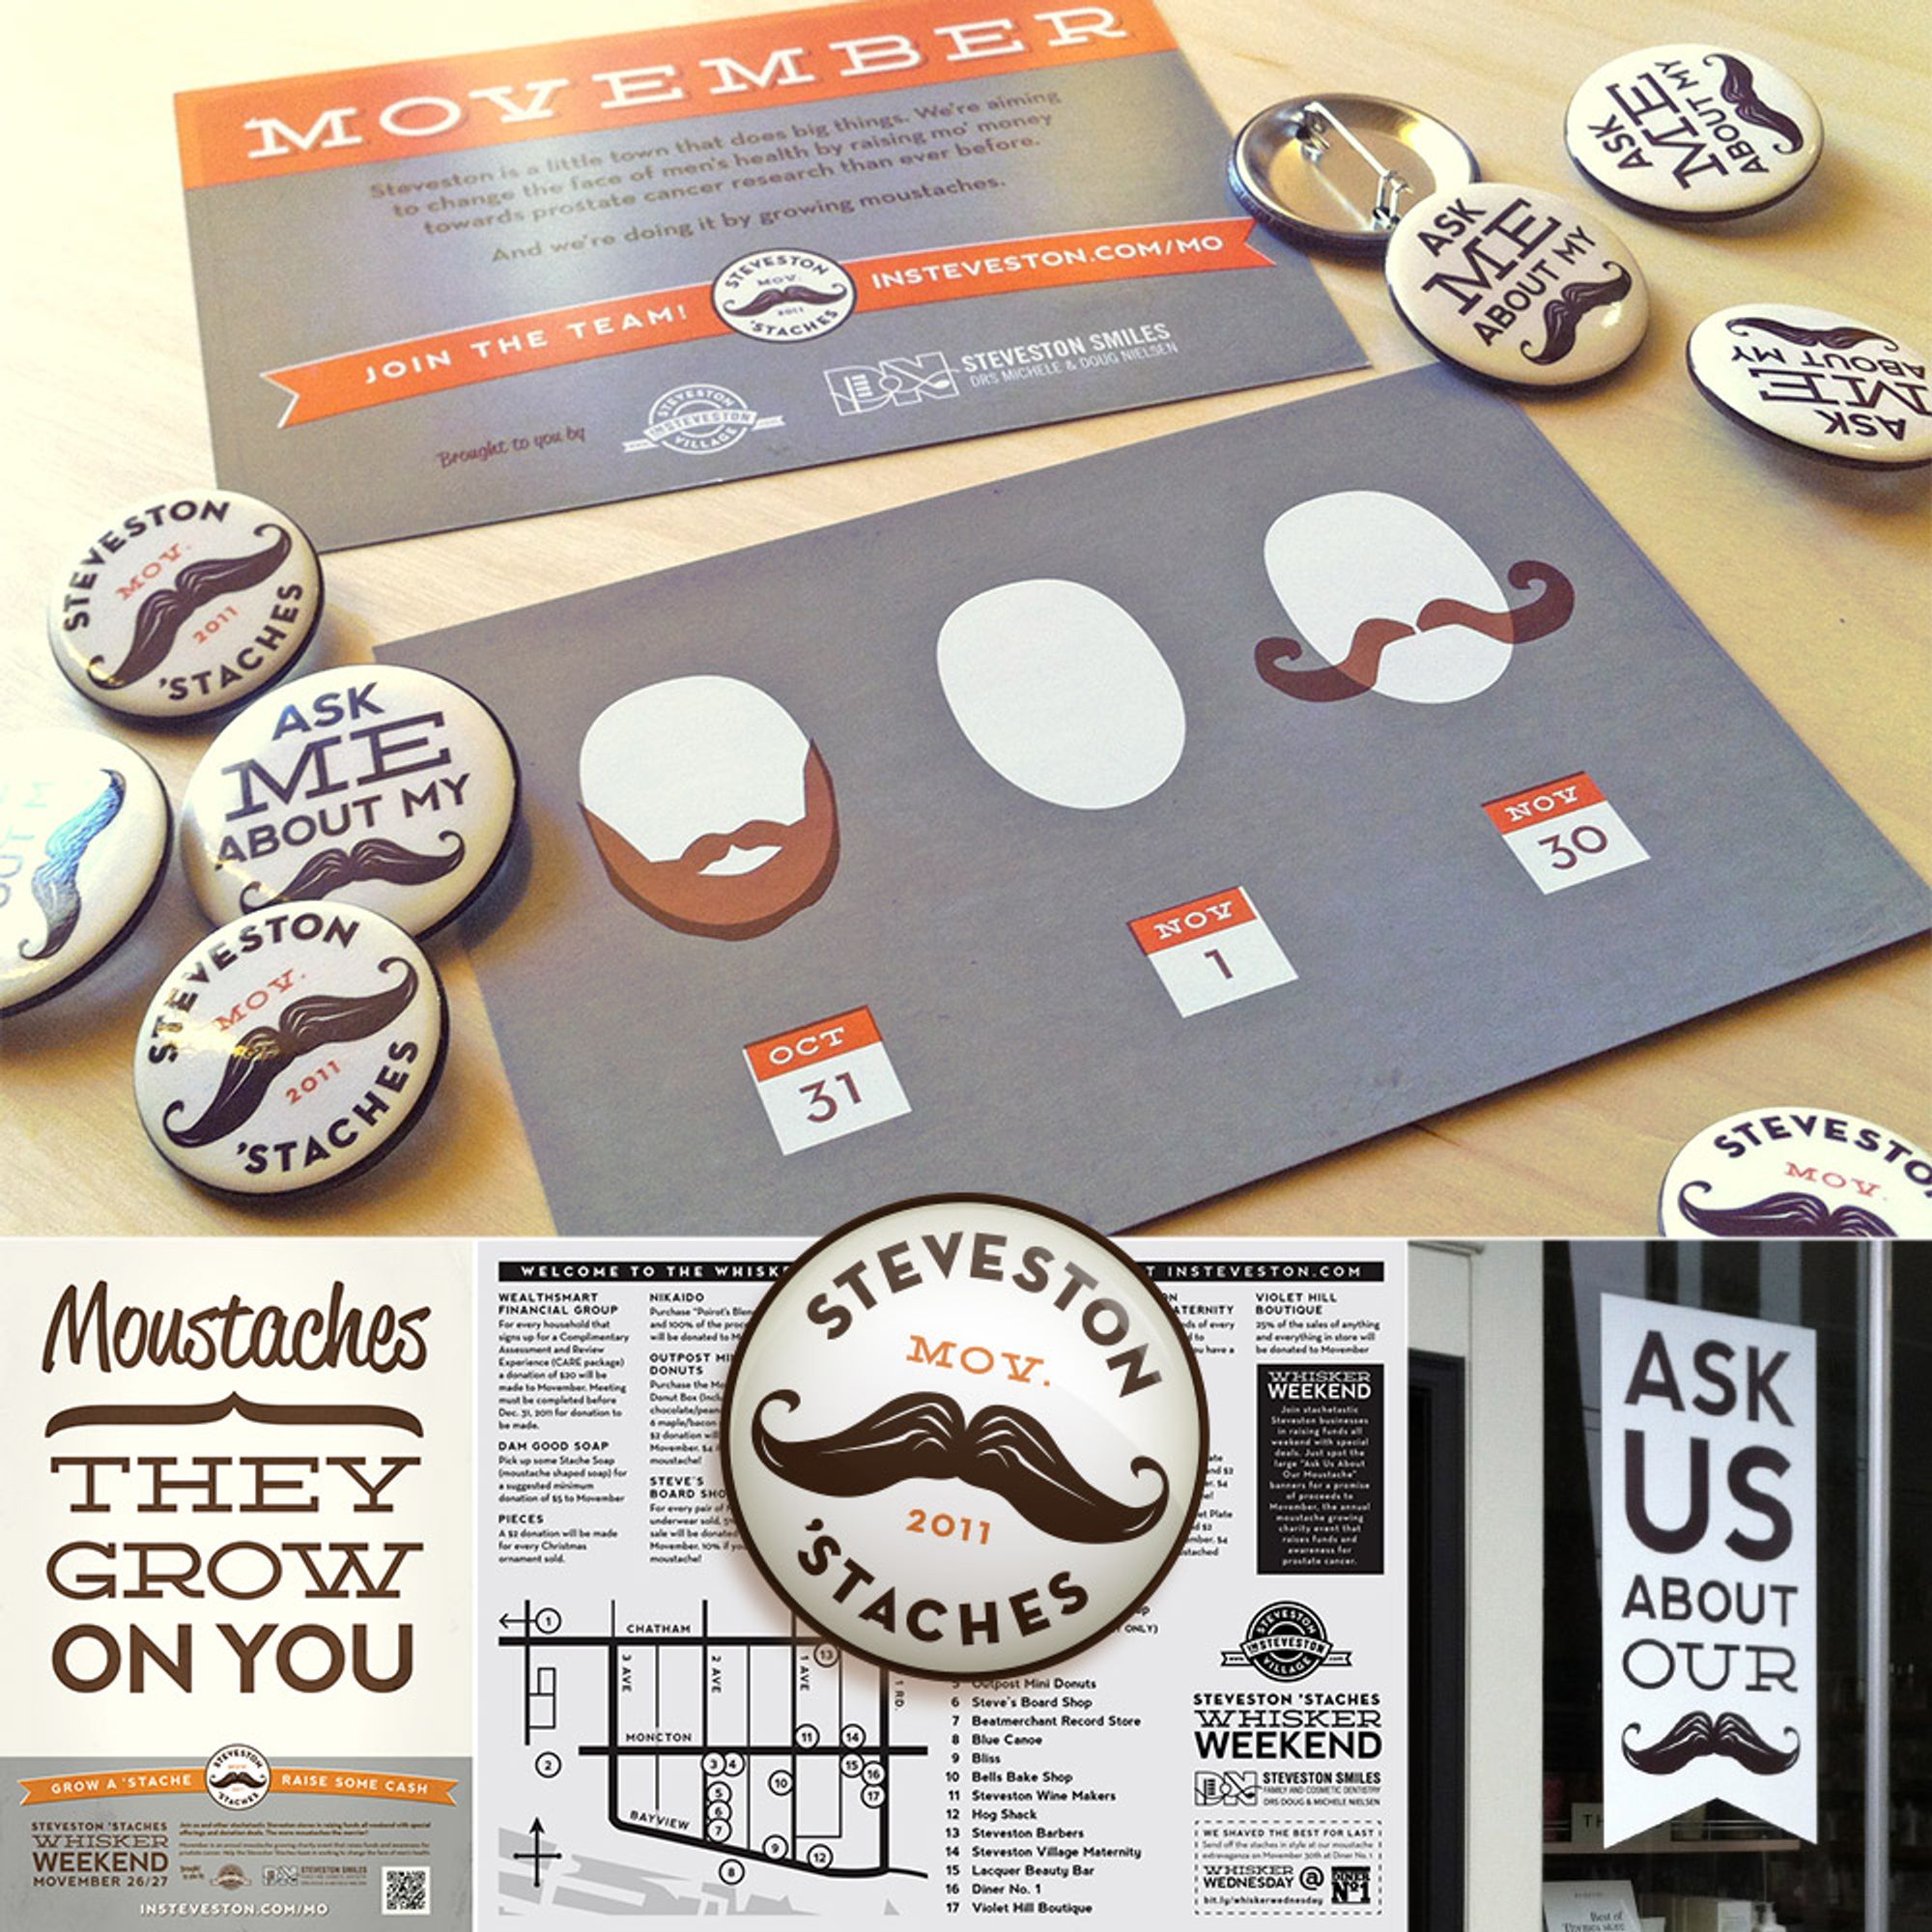 Marketing materials from our Steveston ‘Staches Whisker Weekend fundraiser for Movember